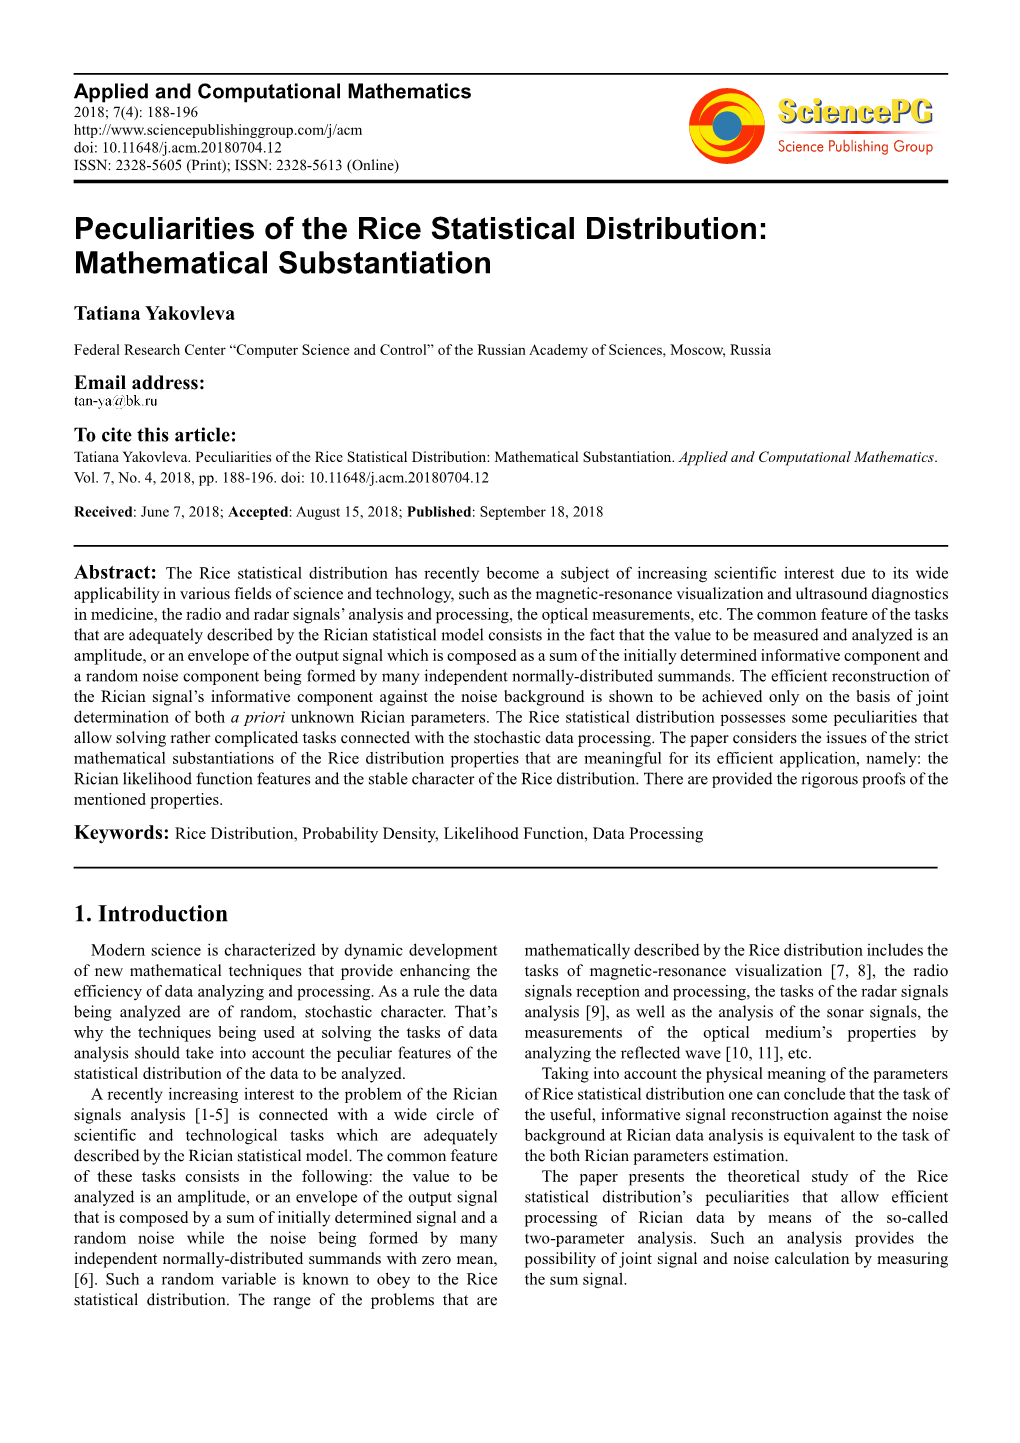 Peculiarities of the Rice Statistical Distribution: Mathematical Substantiation